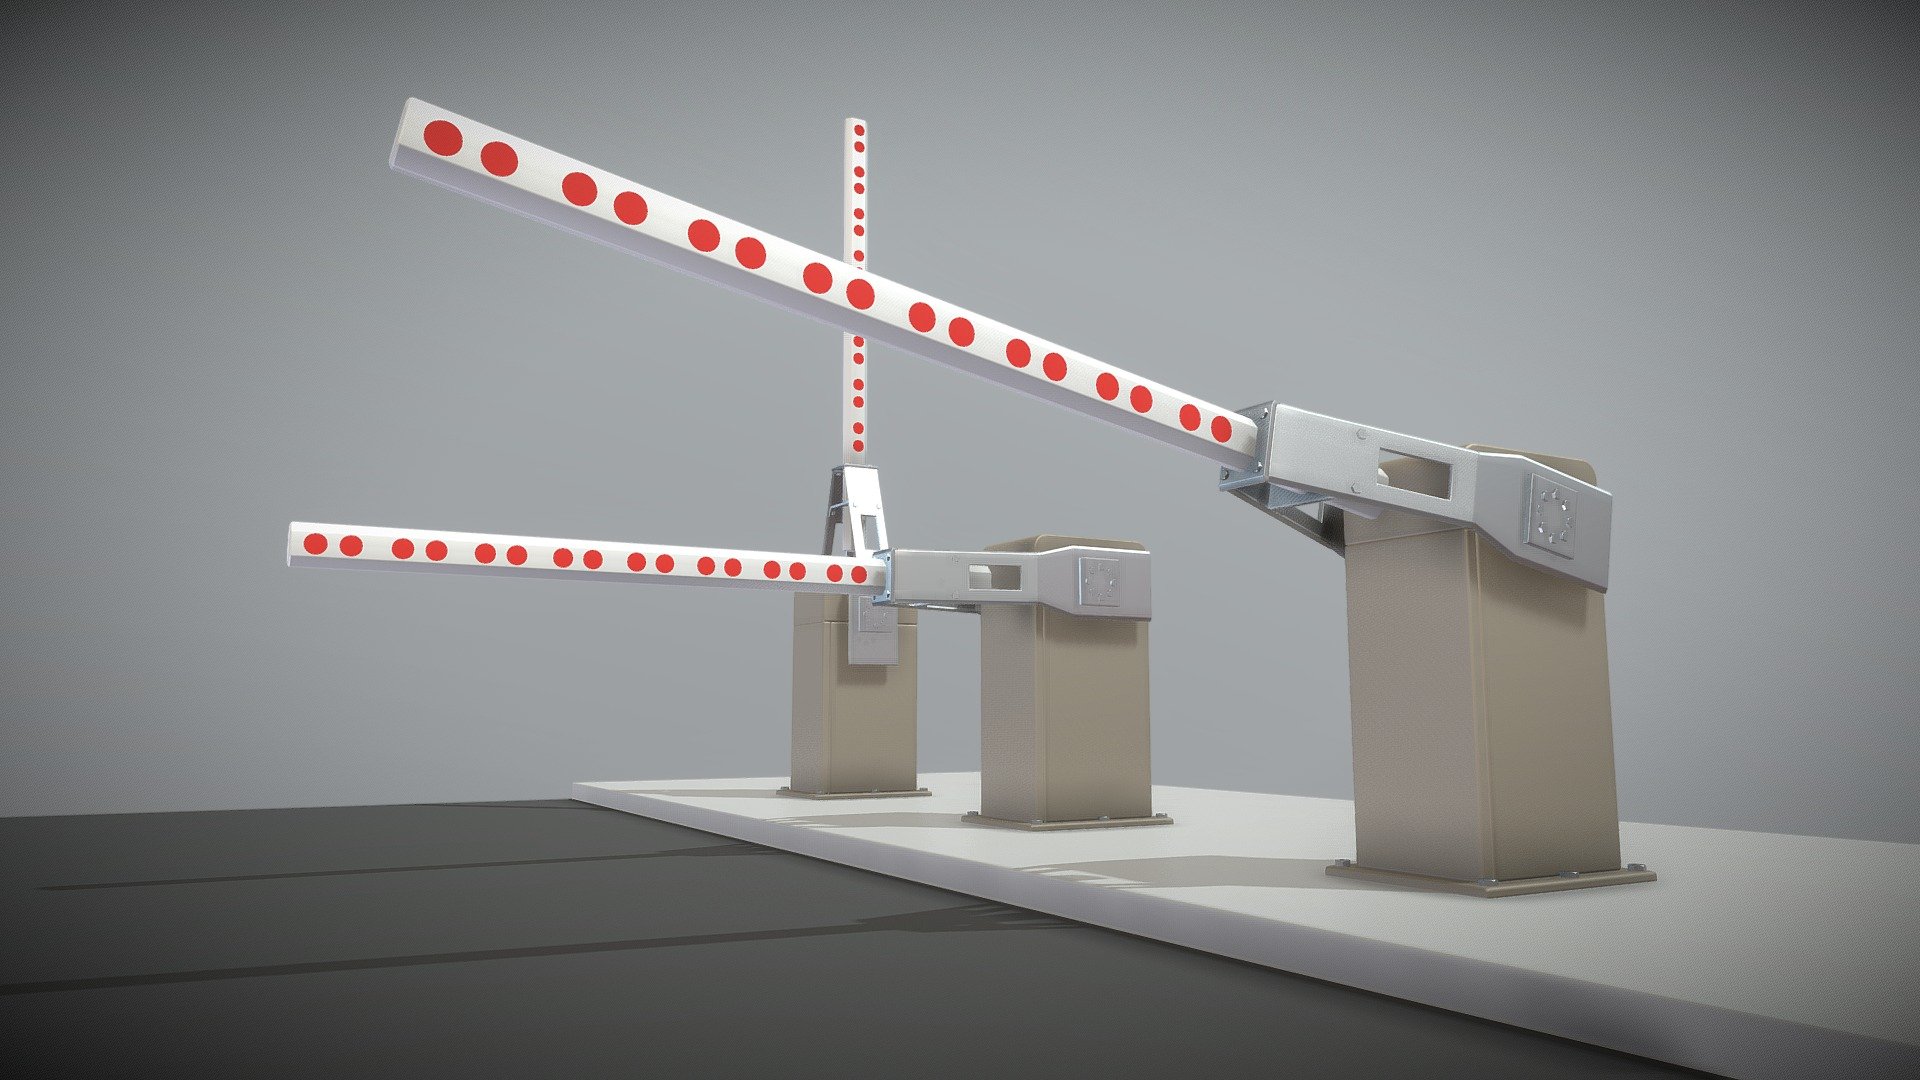 Here is the animated high-poly version of the railroad barrier with a range of 2 meters.




Demovideo (Blender-2.91)

Also included are two static non-animated versions, one with the barrier open and one with the barrier closed.

Made with the Railway Barrier Construction Kit.



Bahnschranken Version mit Reichweite von 2 Metern, high-poly und animiert.

Der Download enthält auch zwei statische nicht animierte Versionen, eine mit offener und eine mit geschlossener Schranke.

Aus dem Bahnschrankenbaukasten.






Name - Railroad-Barrier-2m-animated 

0.673m x 0.529m x 1.666m

Polygons = 5394






Name - Railroad-Barrier-2m-closed 

3.169m x 0.544m x 1.666m

Polygons = 41404






Name - Railroad-Barrier-2m-open 

0.673m x 0.544m x 4.311m

Polygons = 41404



Modeled, rigged and animated by 3DHaupt in Blender-2.91 - Railroad Barrier 2m (High-Poly) - Buy Royalty Free 3D model by VIS-All-3D (@VIS-All) 3d model